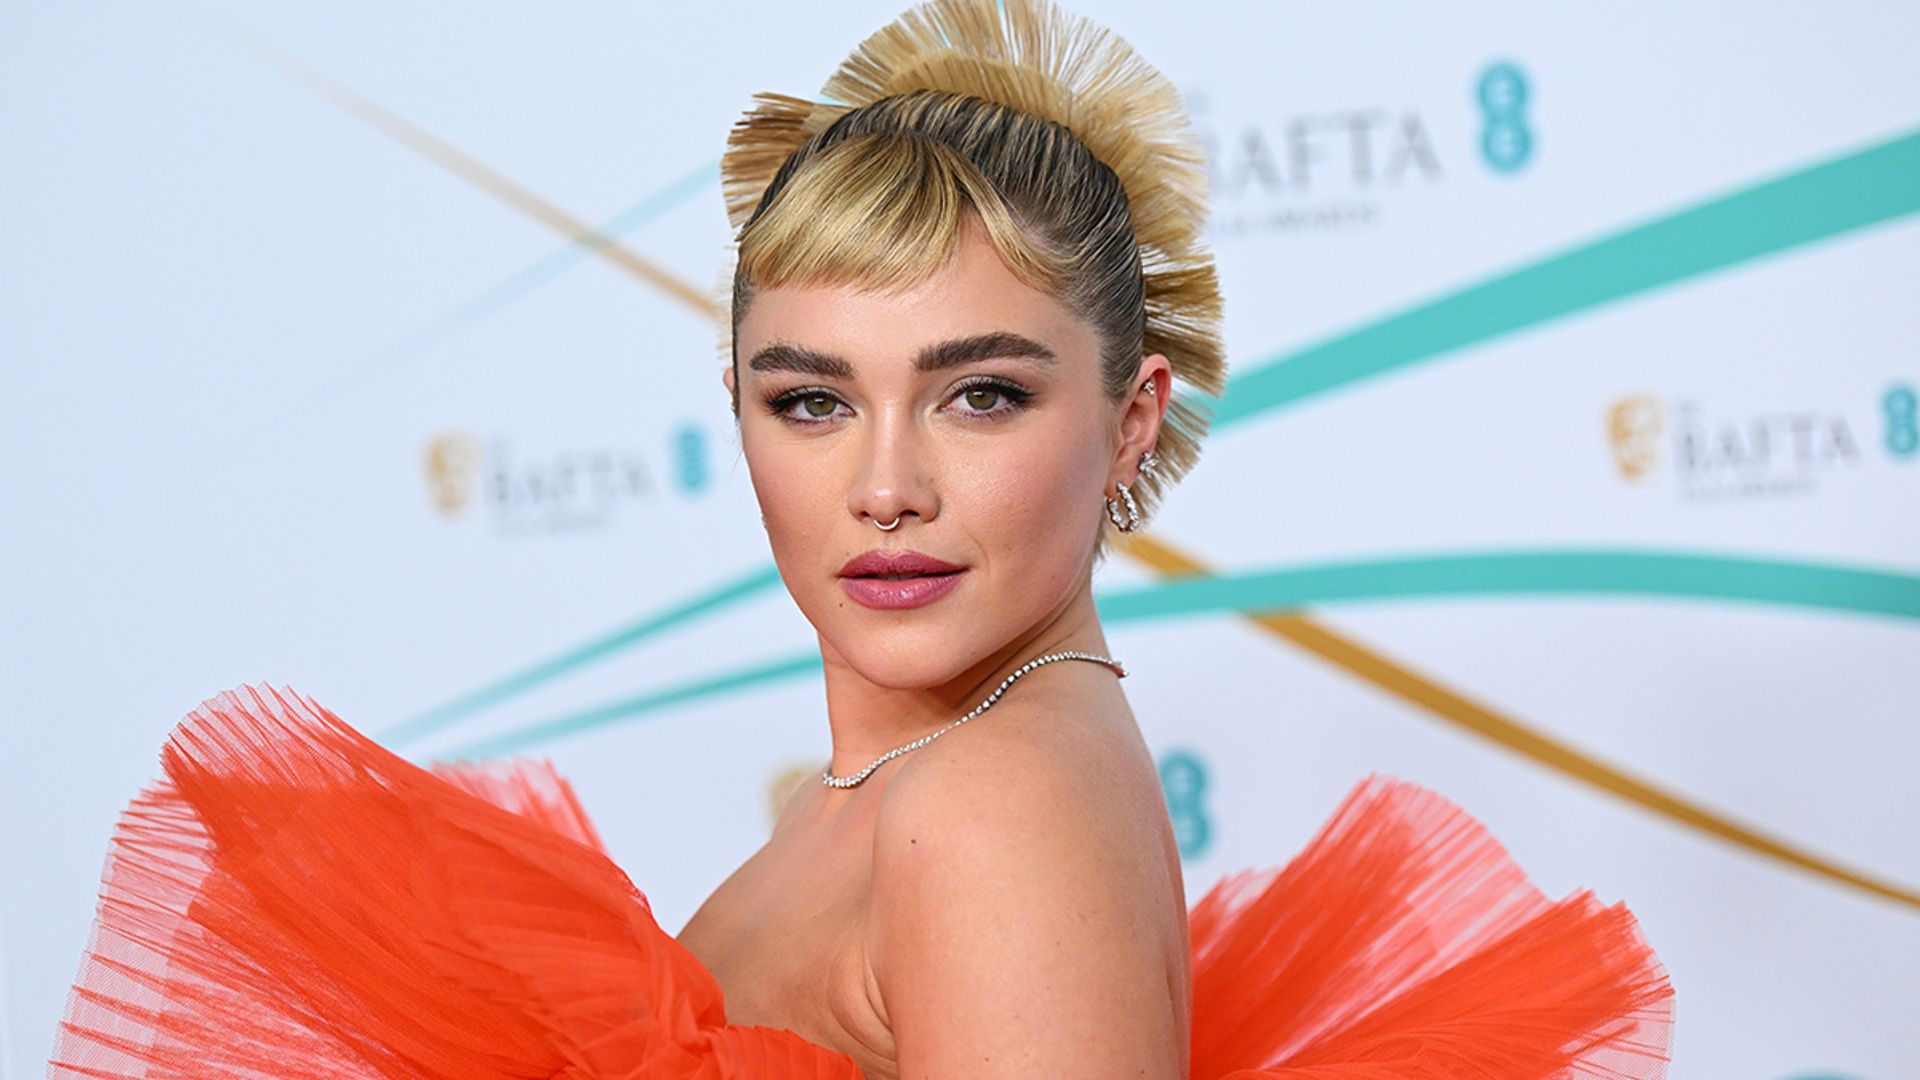 Florence Pugh puts a vibrant spin on the visible lingerie trend at the 2023 BAFTAs